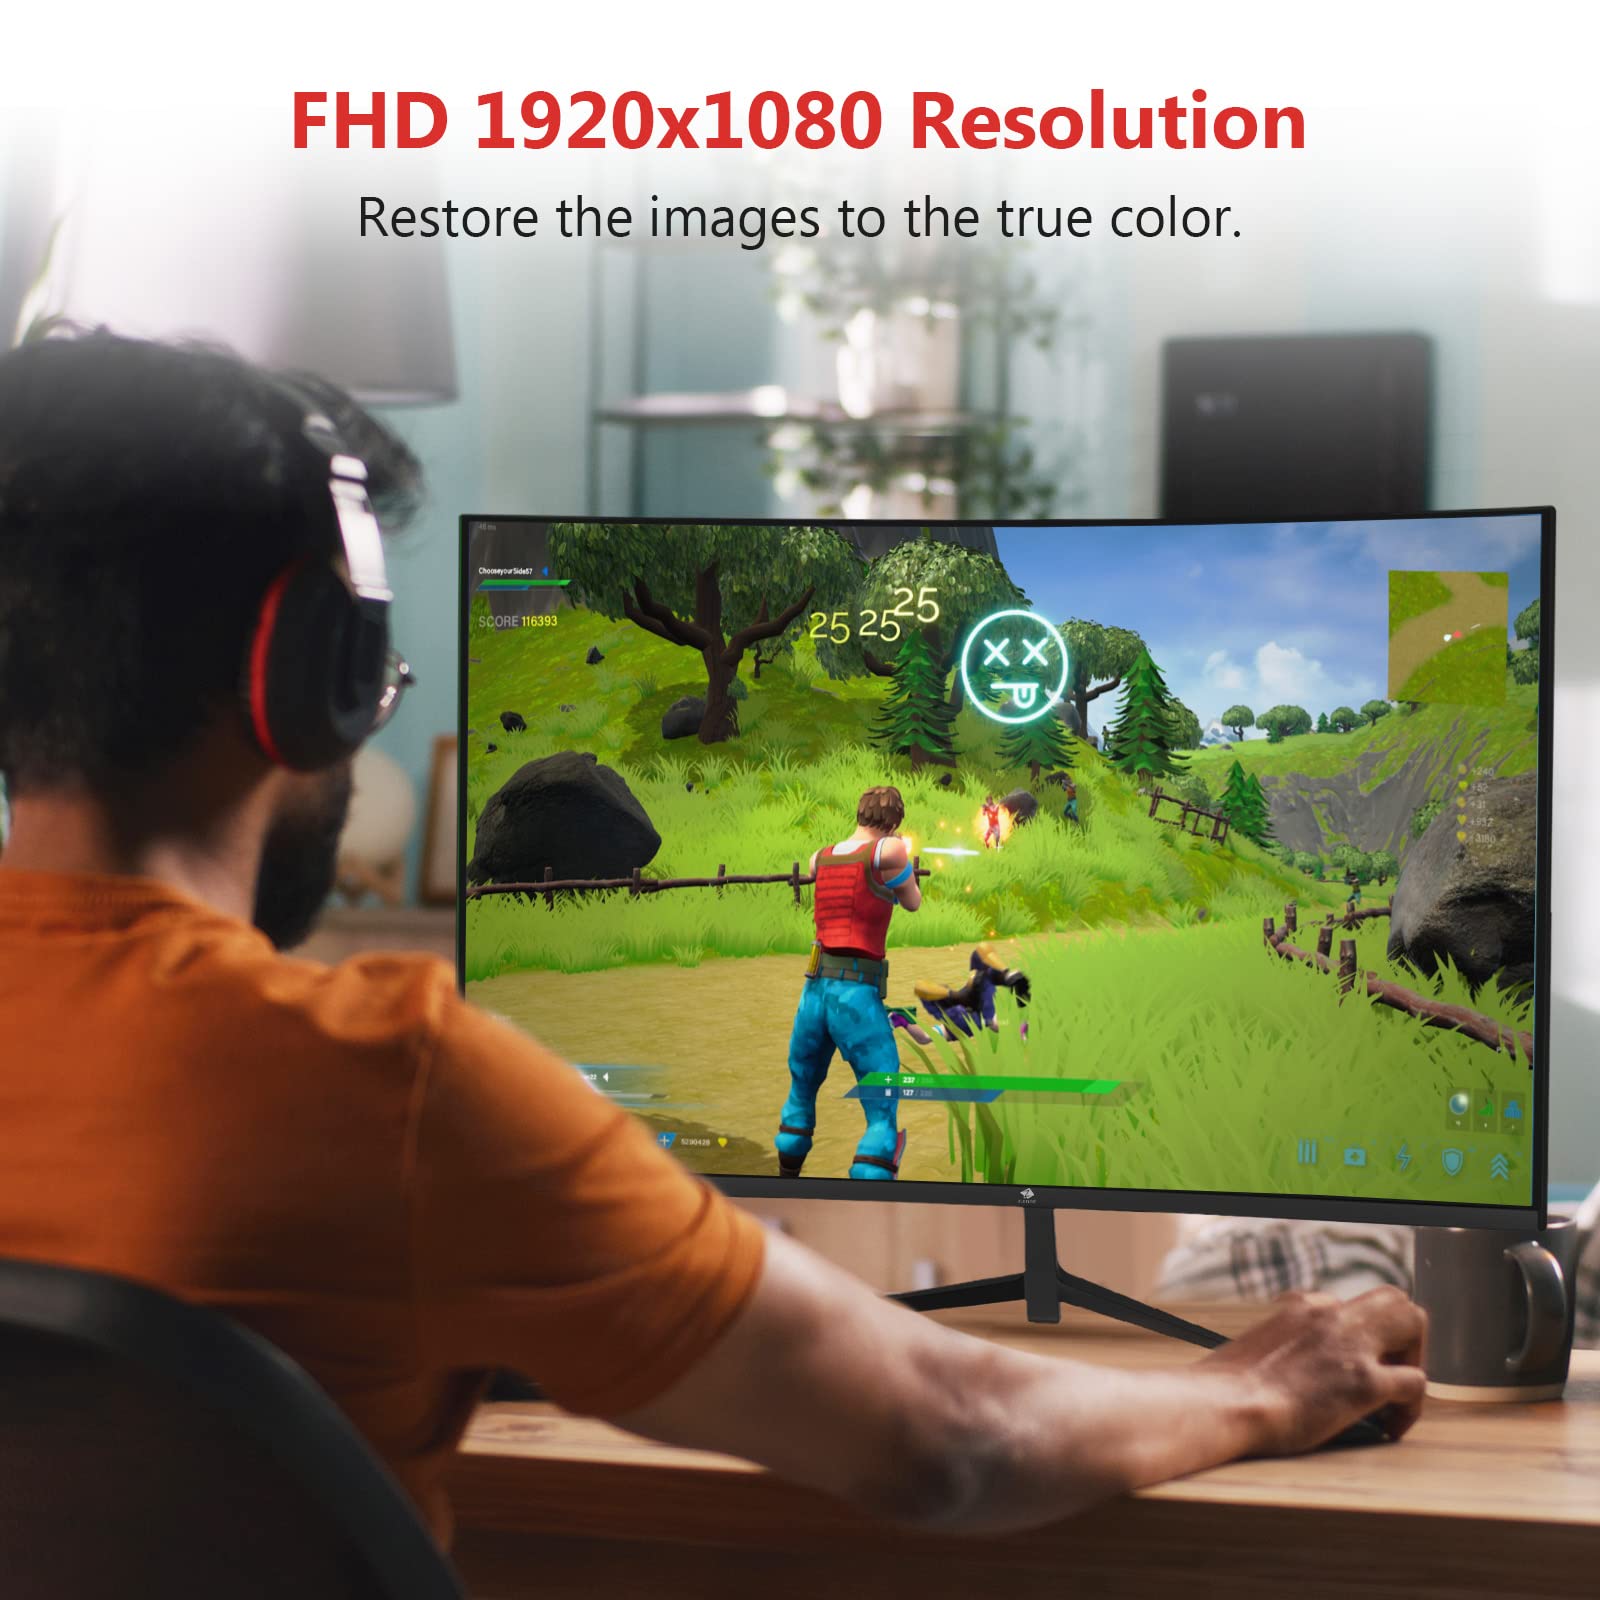 Z-Edge UG27P 27-inch Curved Gaming Monitor 16:9 1920x1080 240Hz 1ms Frameless LED Gaming Monitor, AMD Freesync Premium Display Port HDMI Built-in Speakers